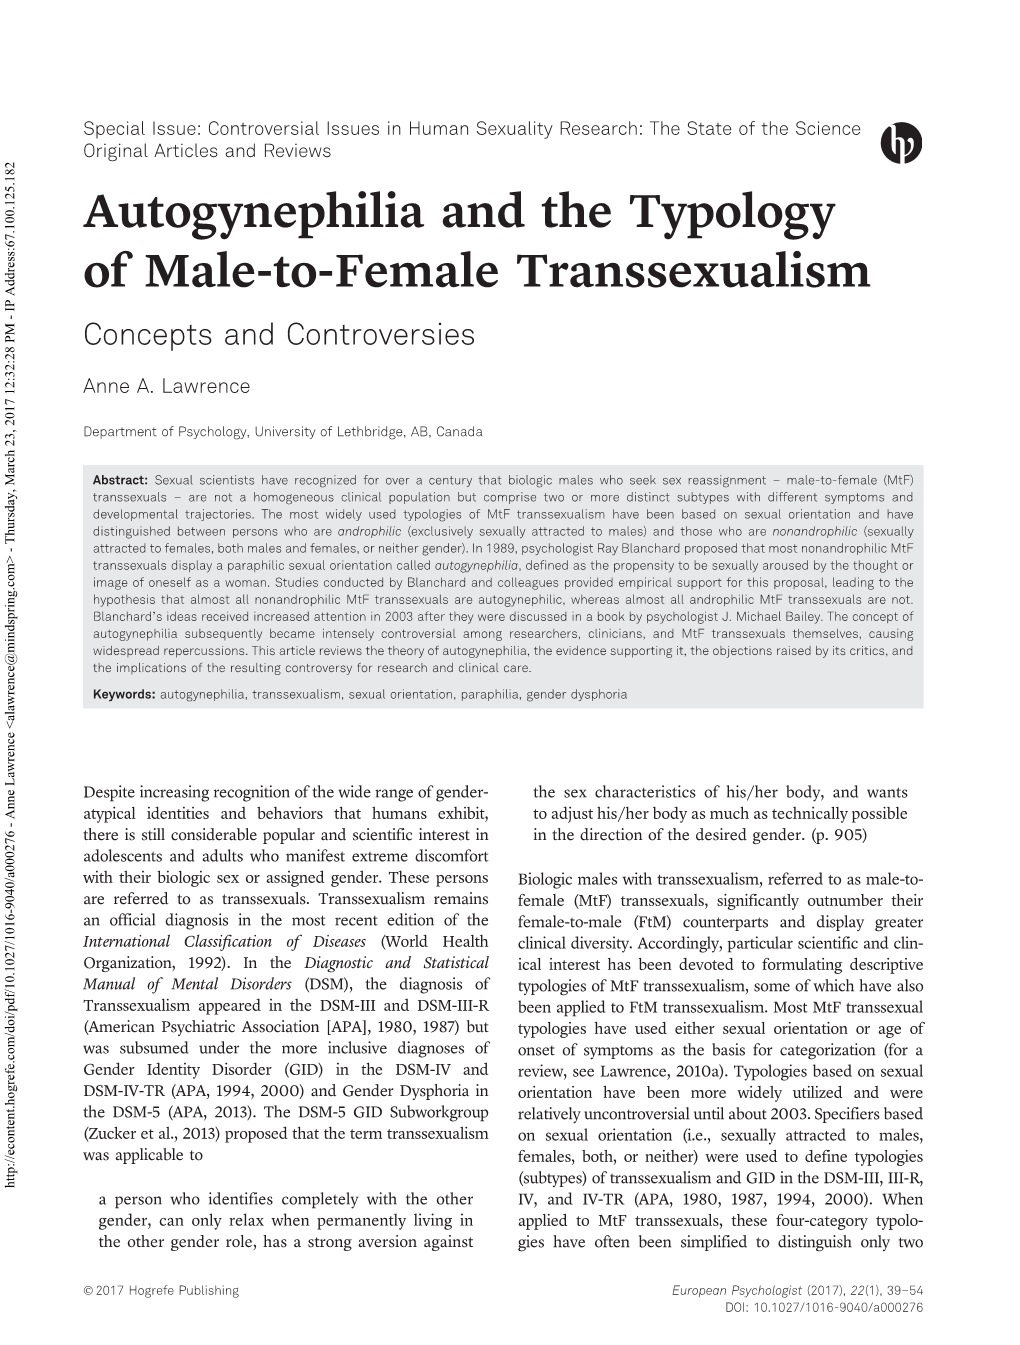 Autogynephilia and the Typology of Male-To-Female Transsexualism Concepts and Controversies